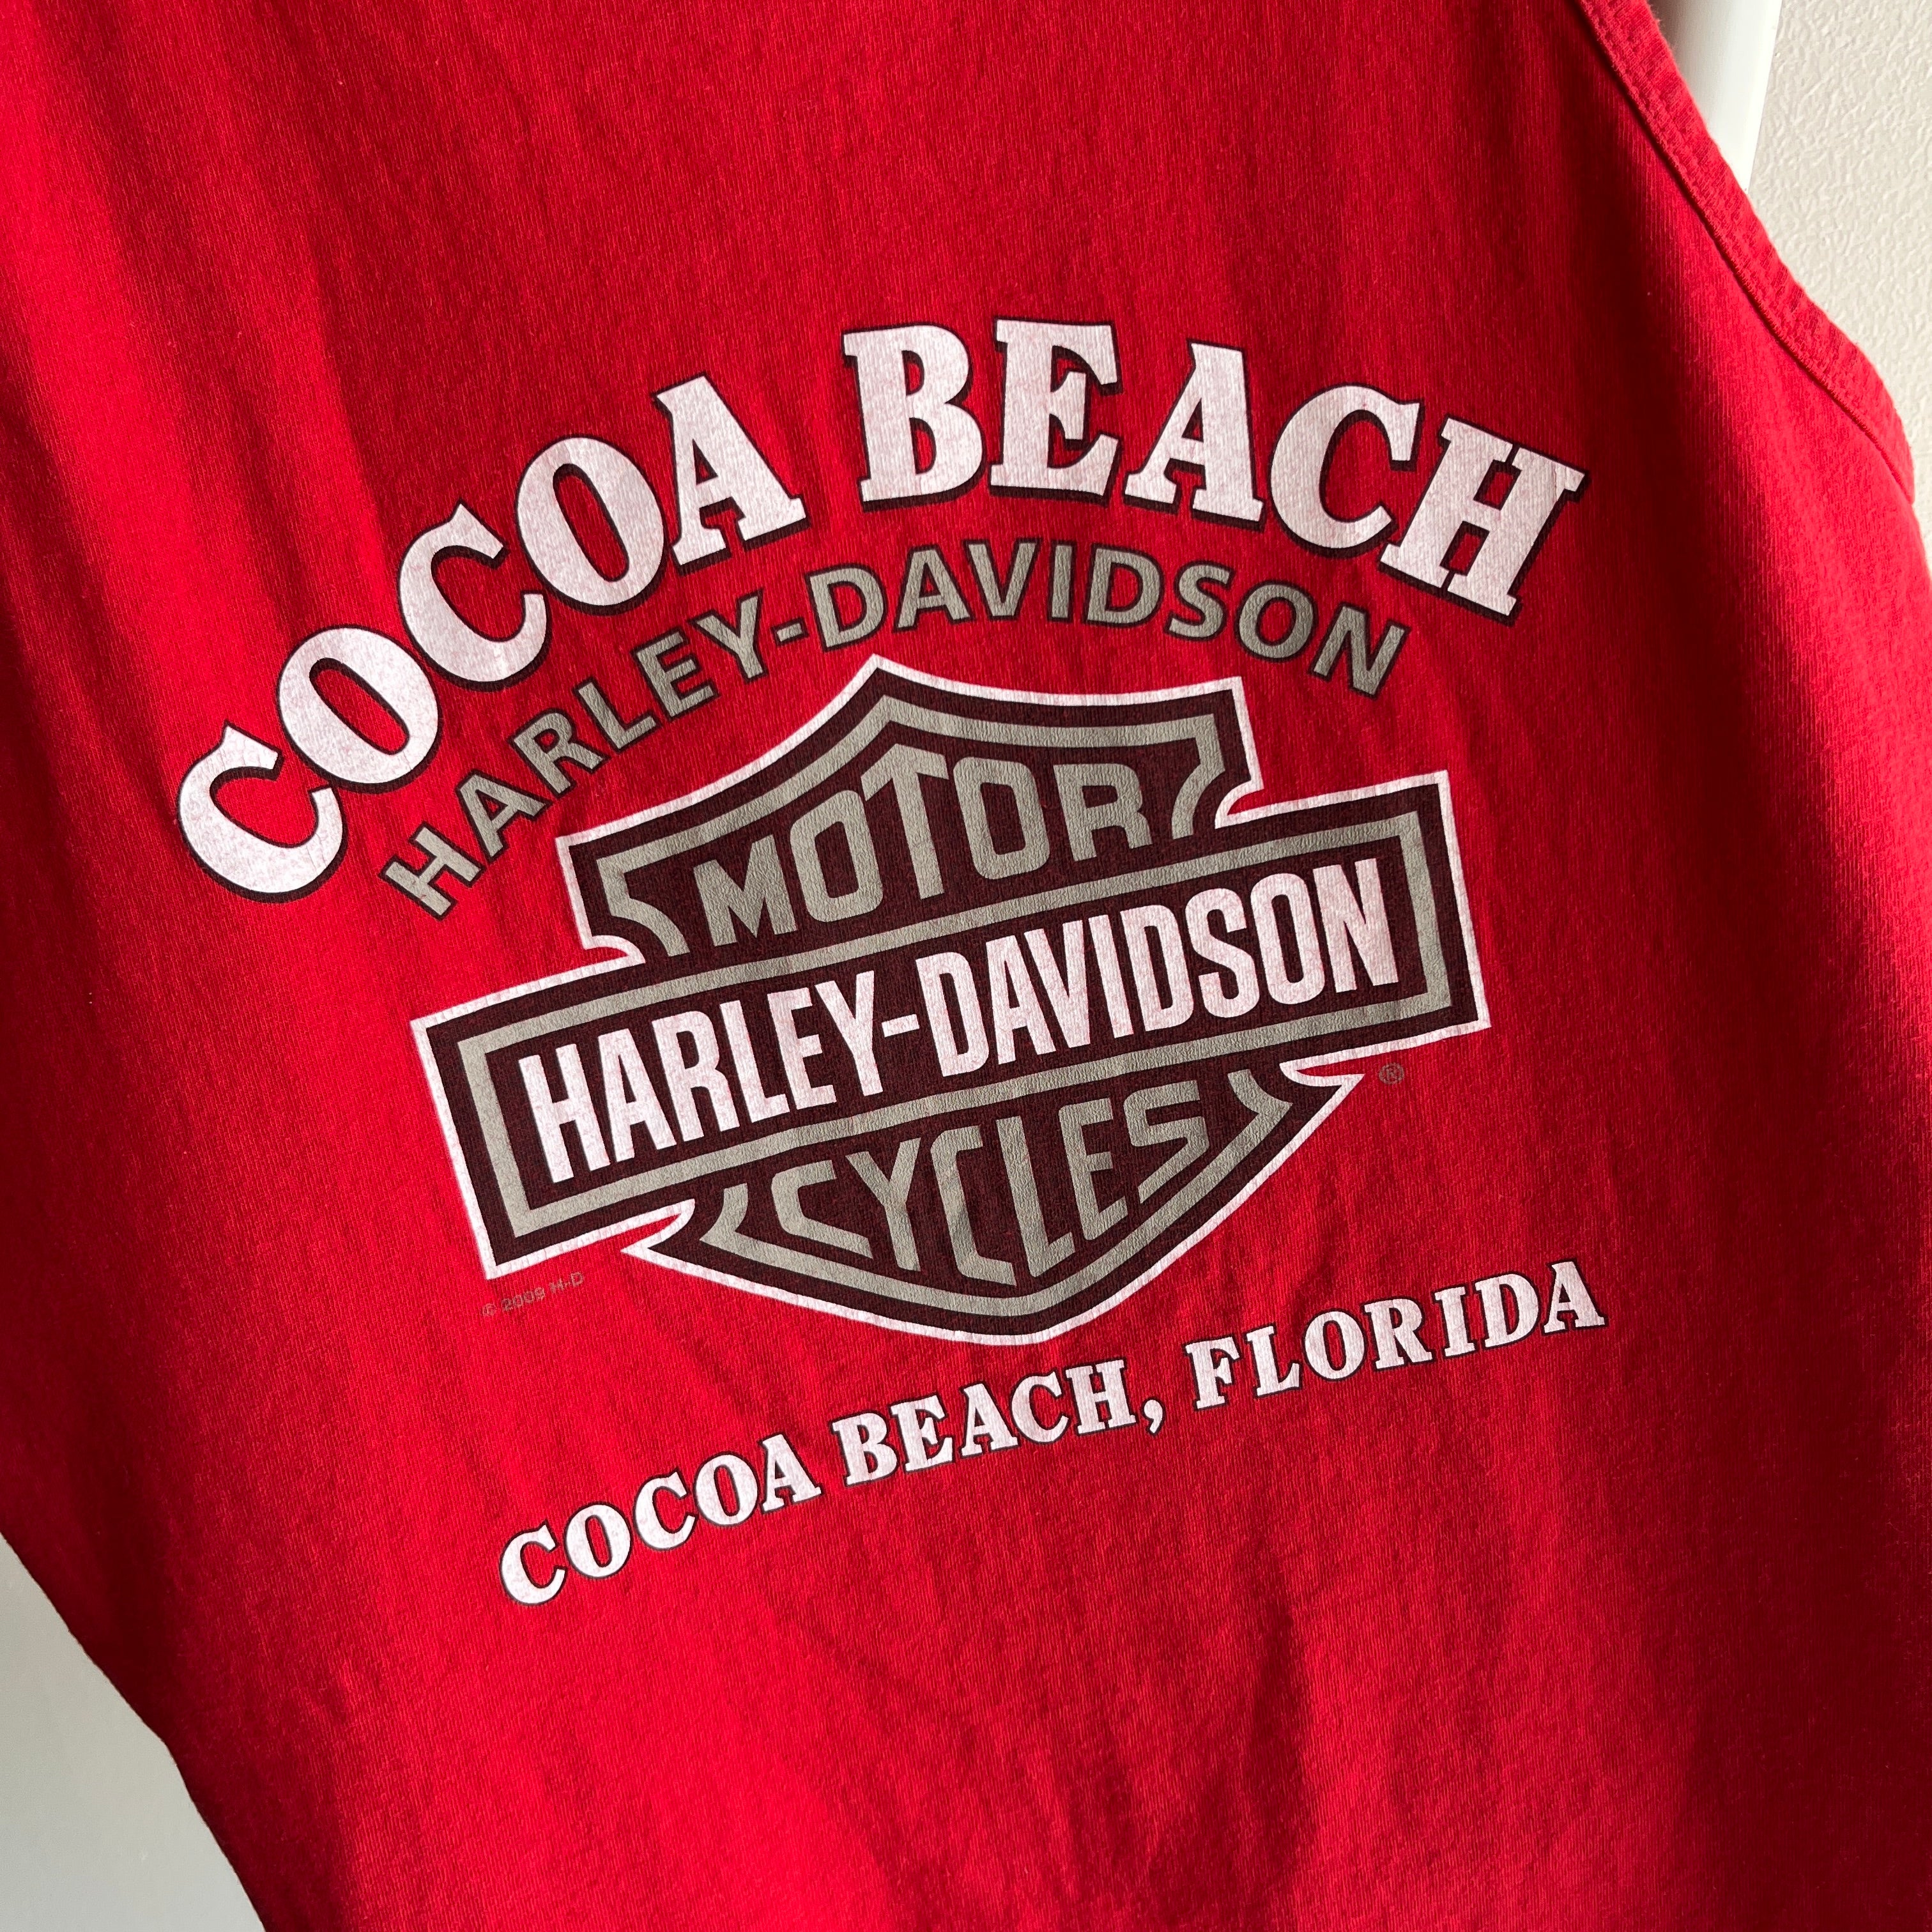 2010 Cocoa Beach, Florida Cotton Harley Tank - Almost Vintage, But Not Quite